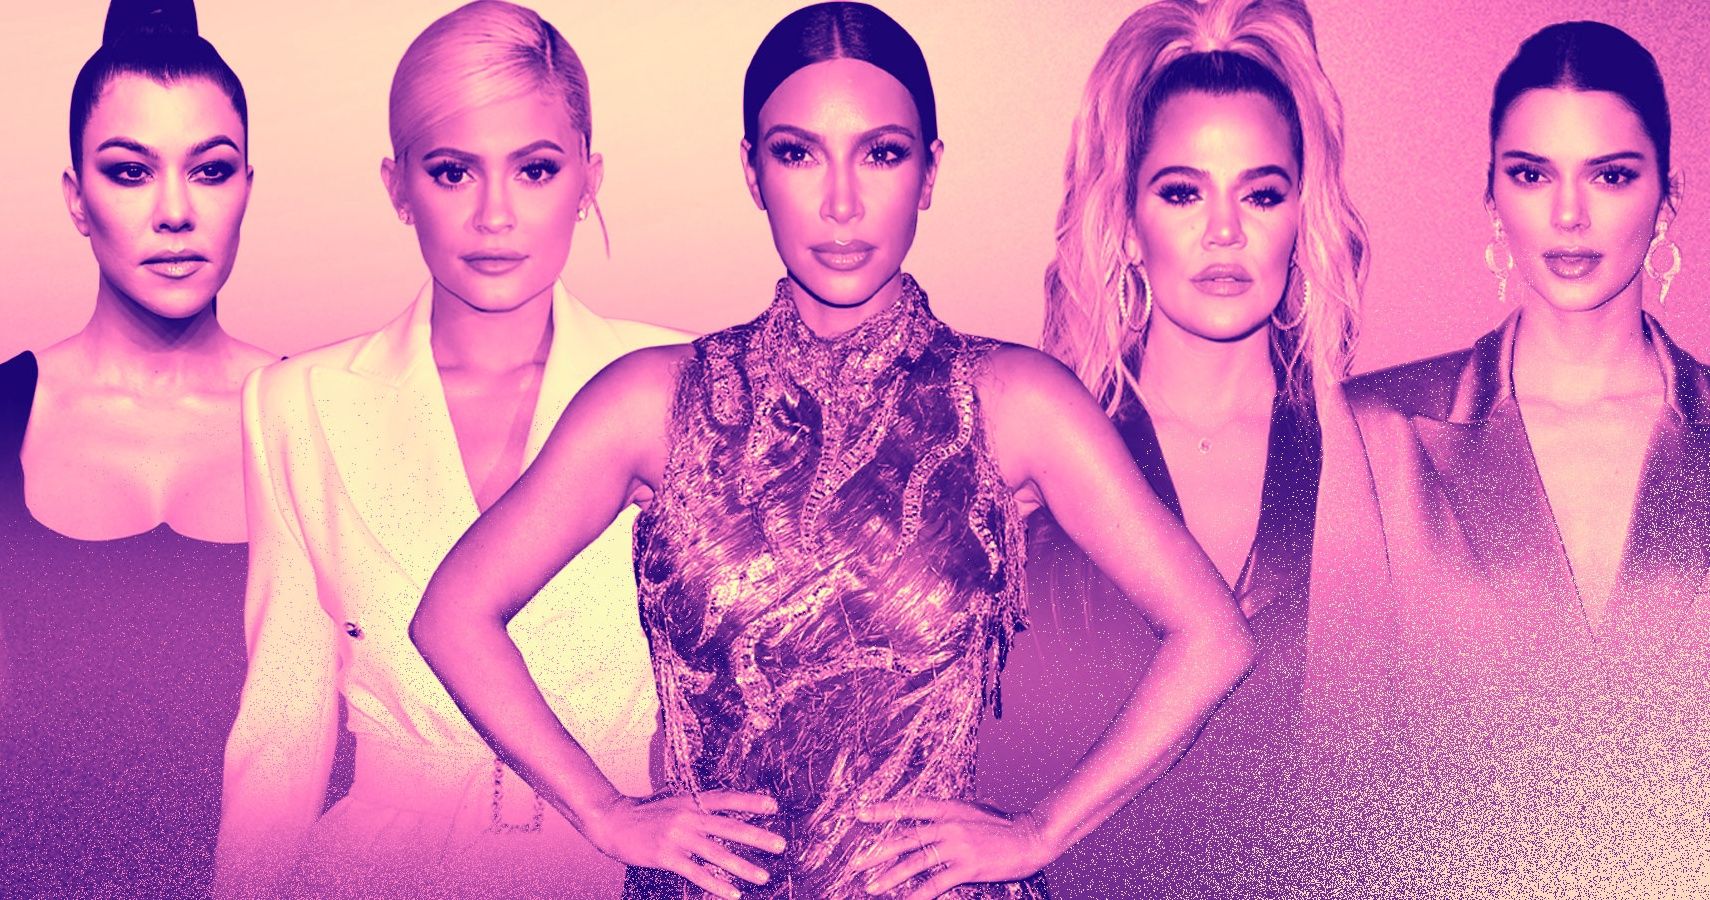 KUWTK Why Fans Think Kim Kardashian is the Most Humble Sister